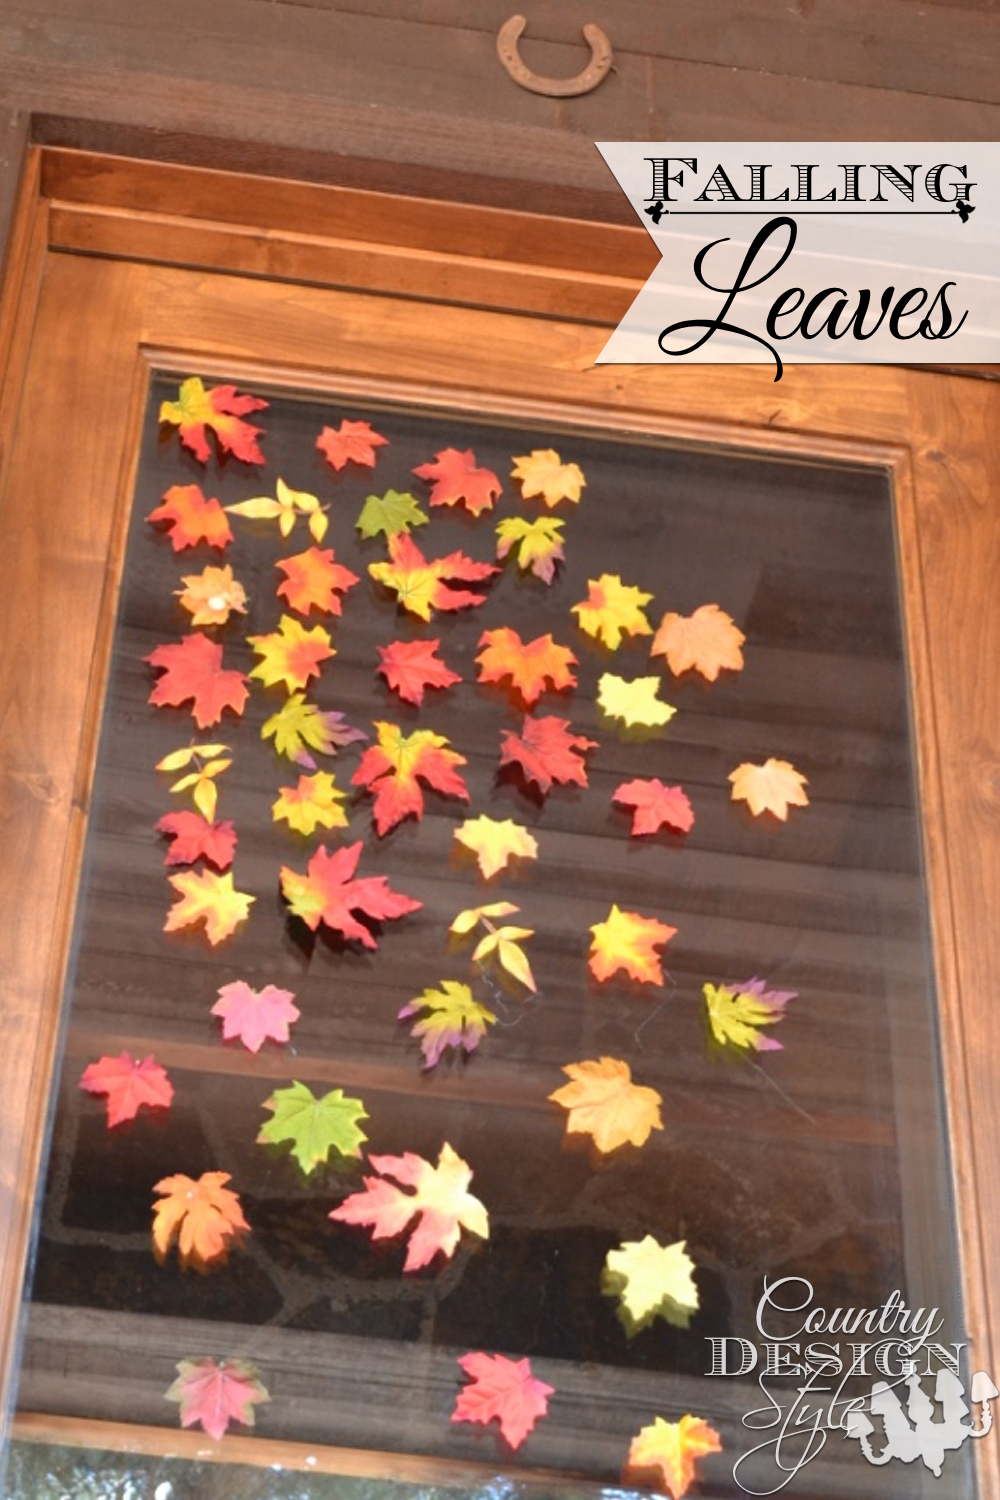 Do you dare to hot glue silk leaves to your glass door? I did this early fall decor with the leaves in the bottom of the fall decor crate. Country Design Style www.countrydesignstyle.com